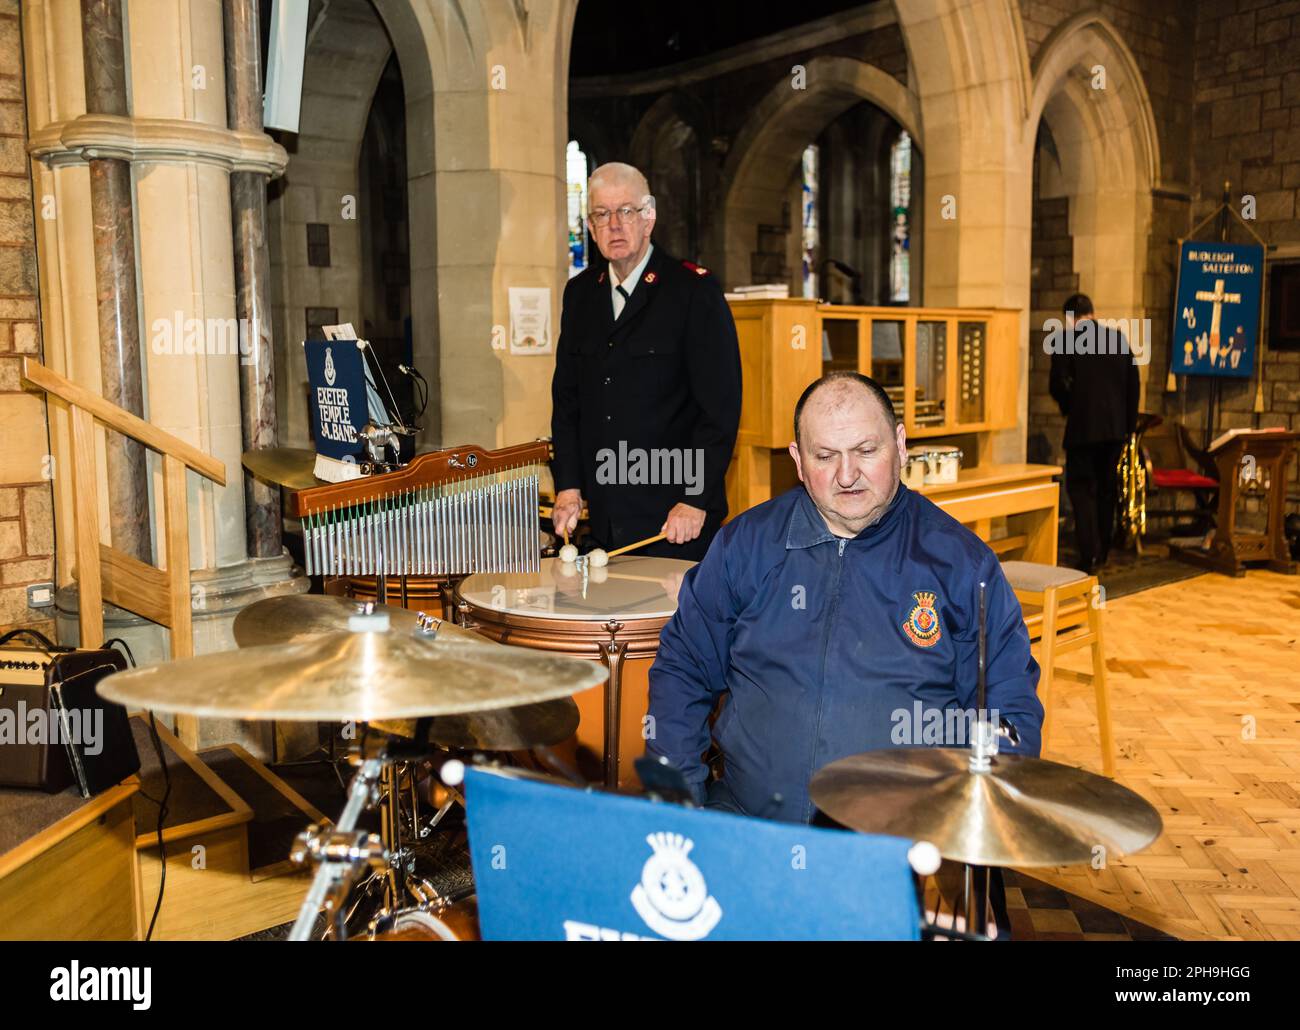 Exeter Temple Salvation Army Frühlingskonzert in St. Peters, Budleigh Salterton. Stockfoto